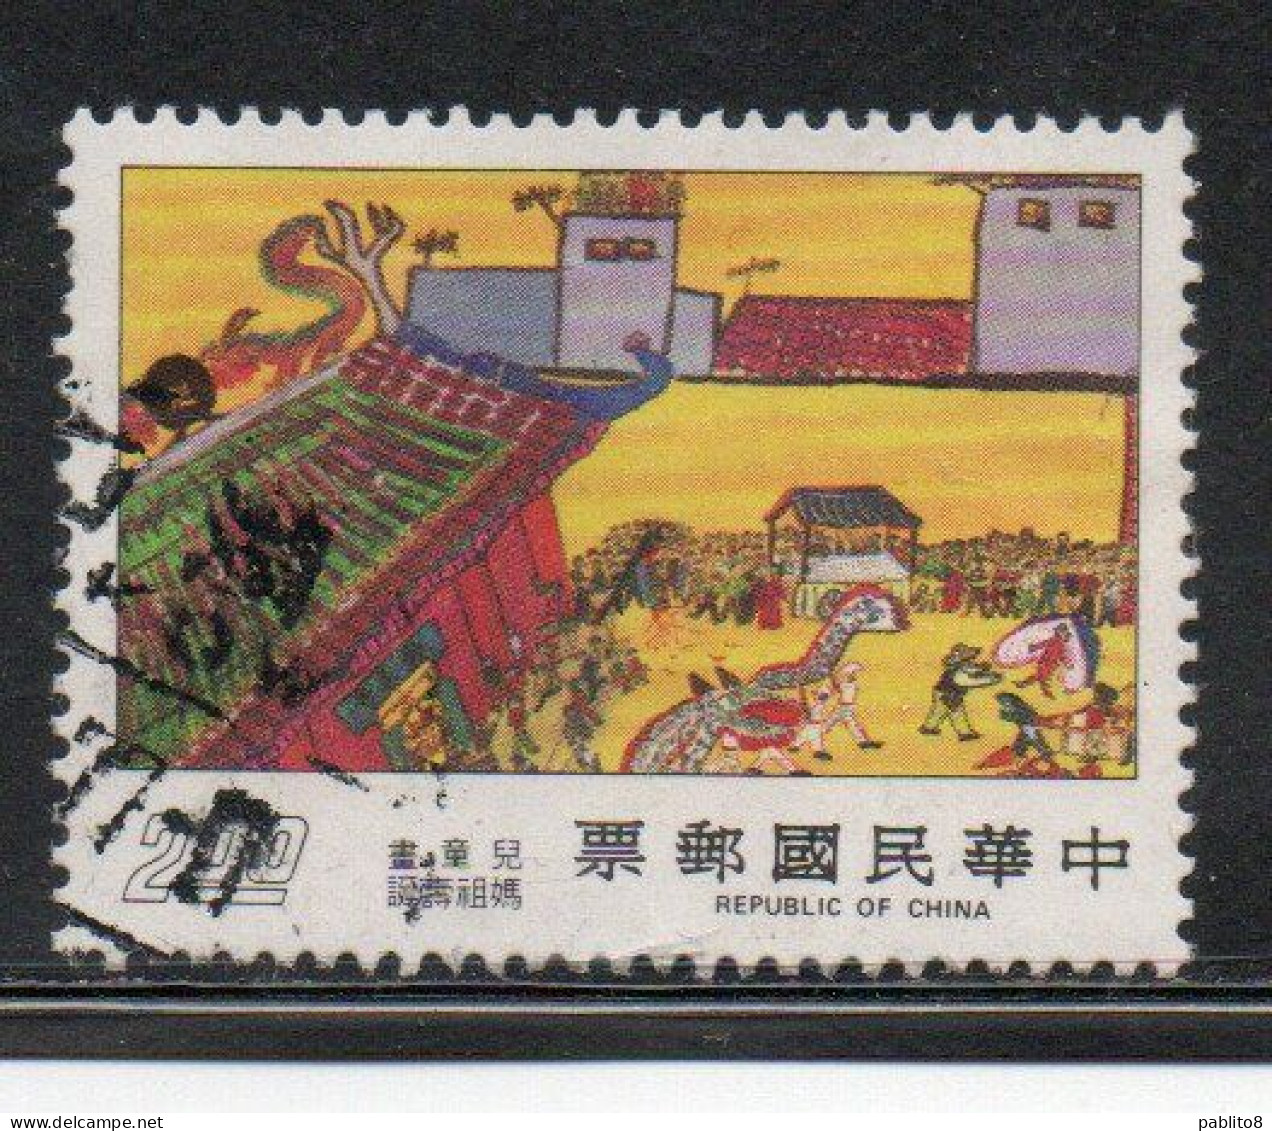 CHINA REPUBLIC CINA TAIWAN FORMOSA 1977 CHILDREN'S DRAWINGS SEA GODDESS FESTIVAL 2$ USED USATO OBLITERE' - Used Stamps